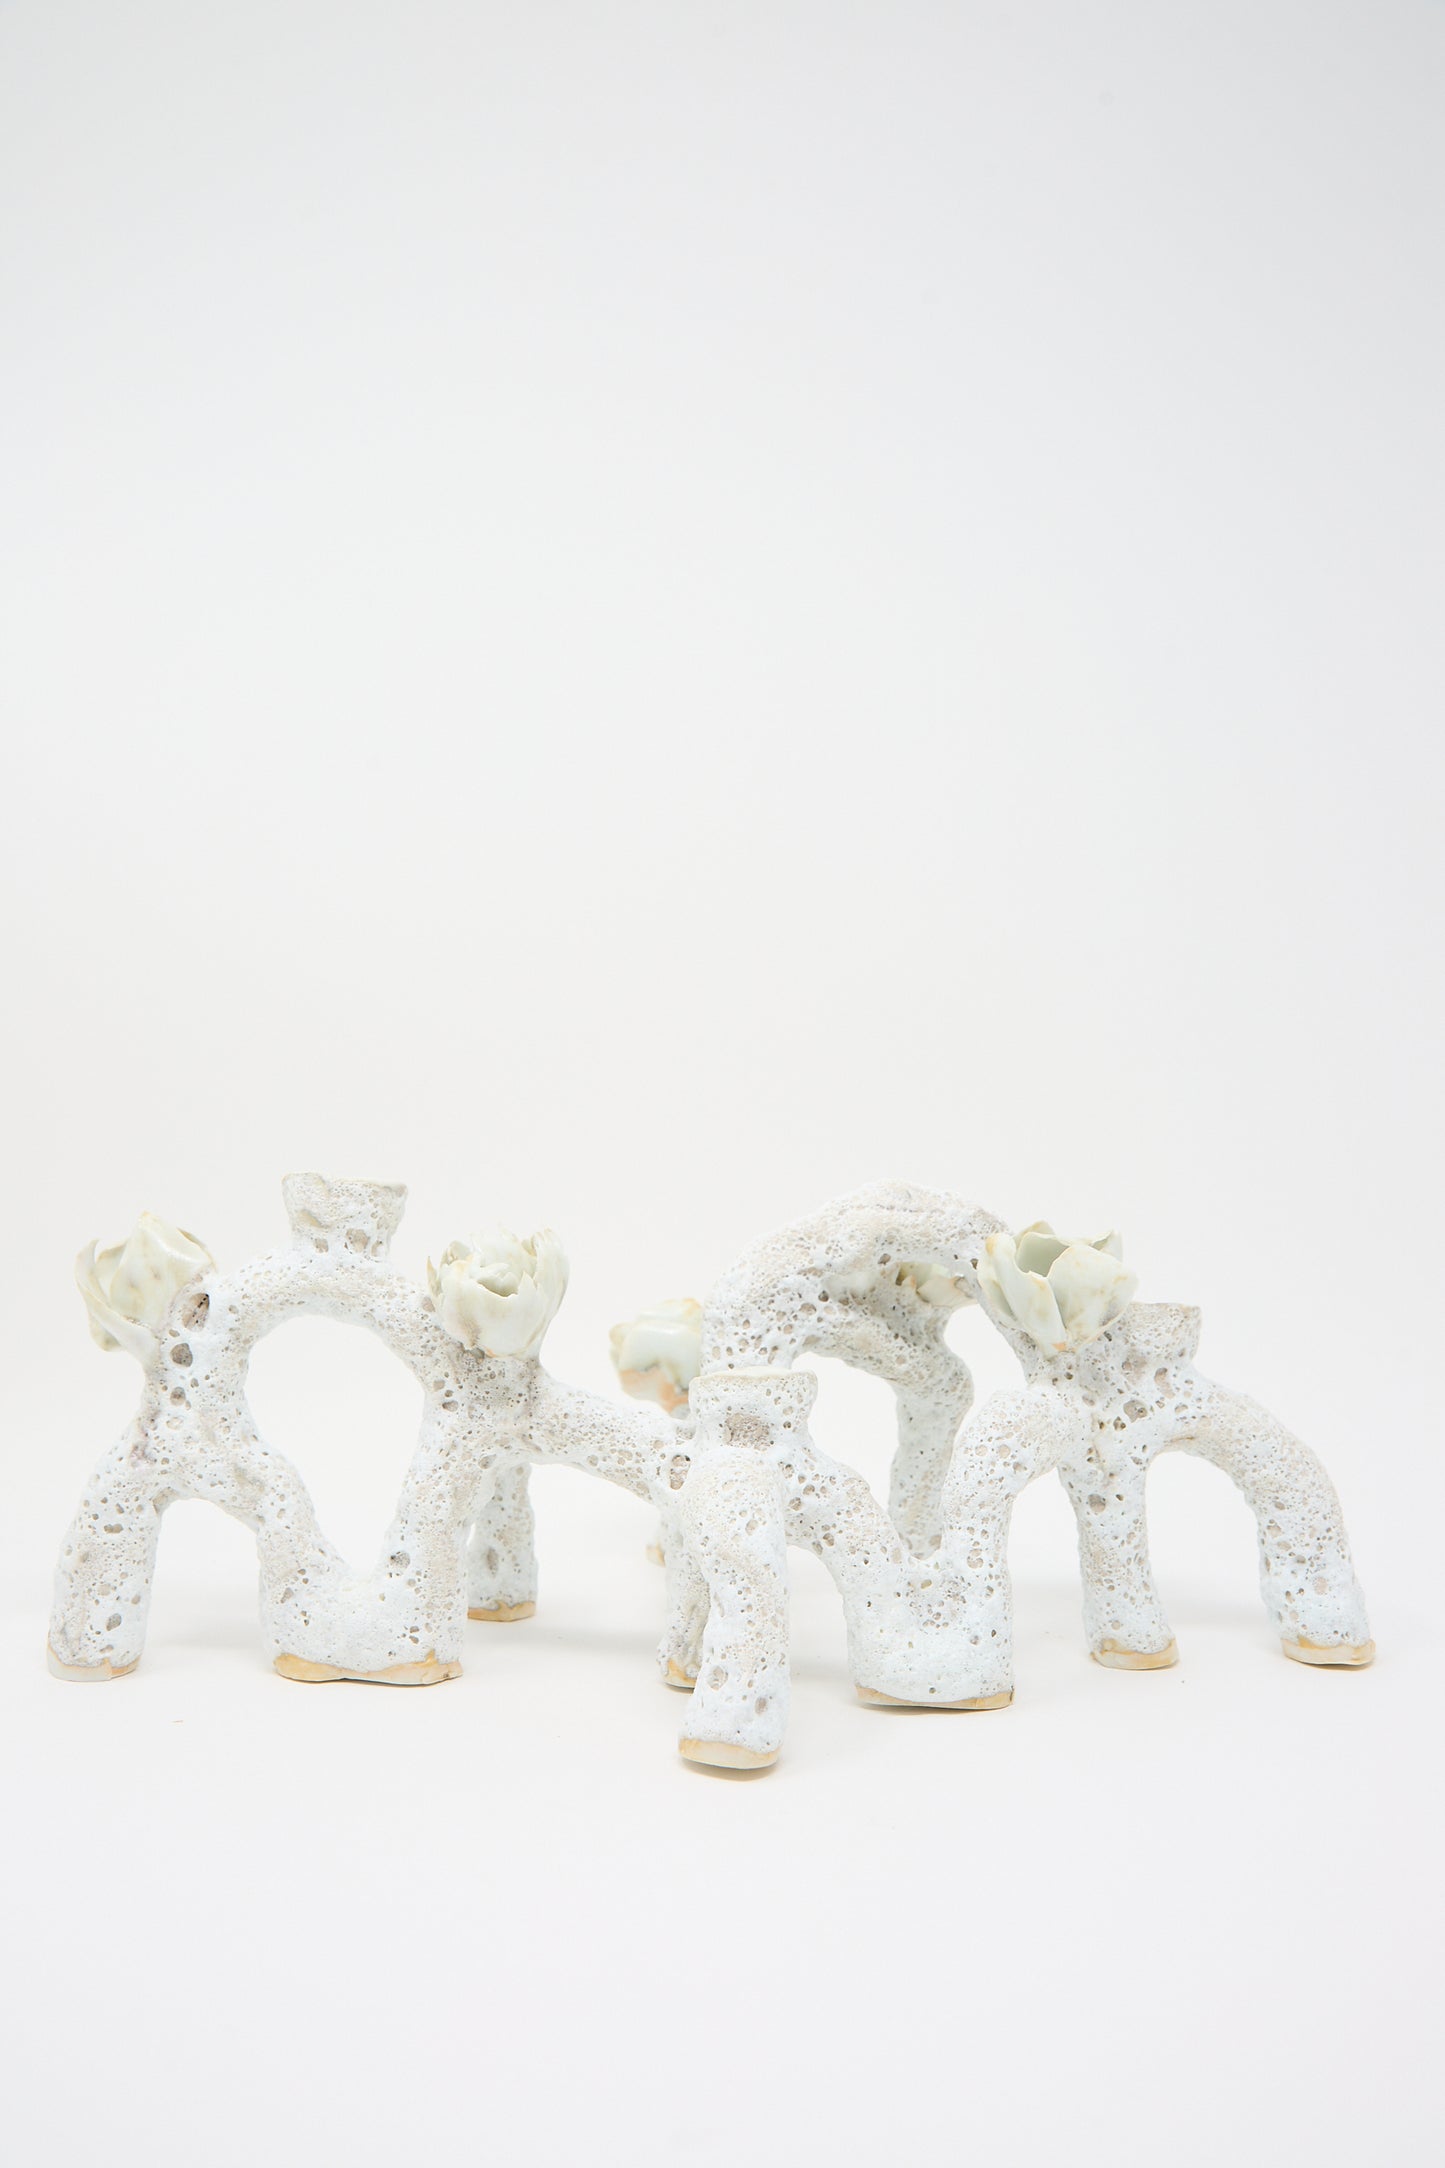 A photo of an abstract ceramic sculpture with arch-like shapes and textured surfaces, reminiscent of the Blooming Arches Candle Holder by Dear You, set against a plain white background.